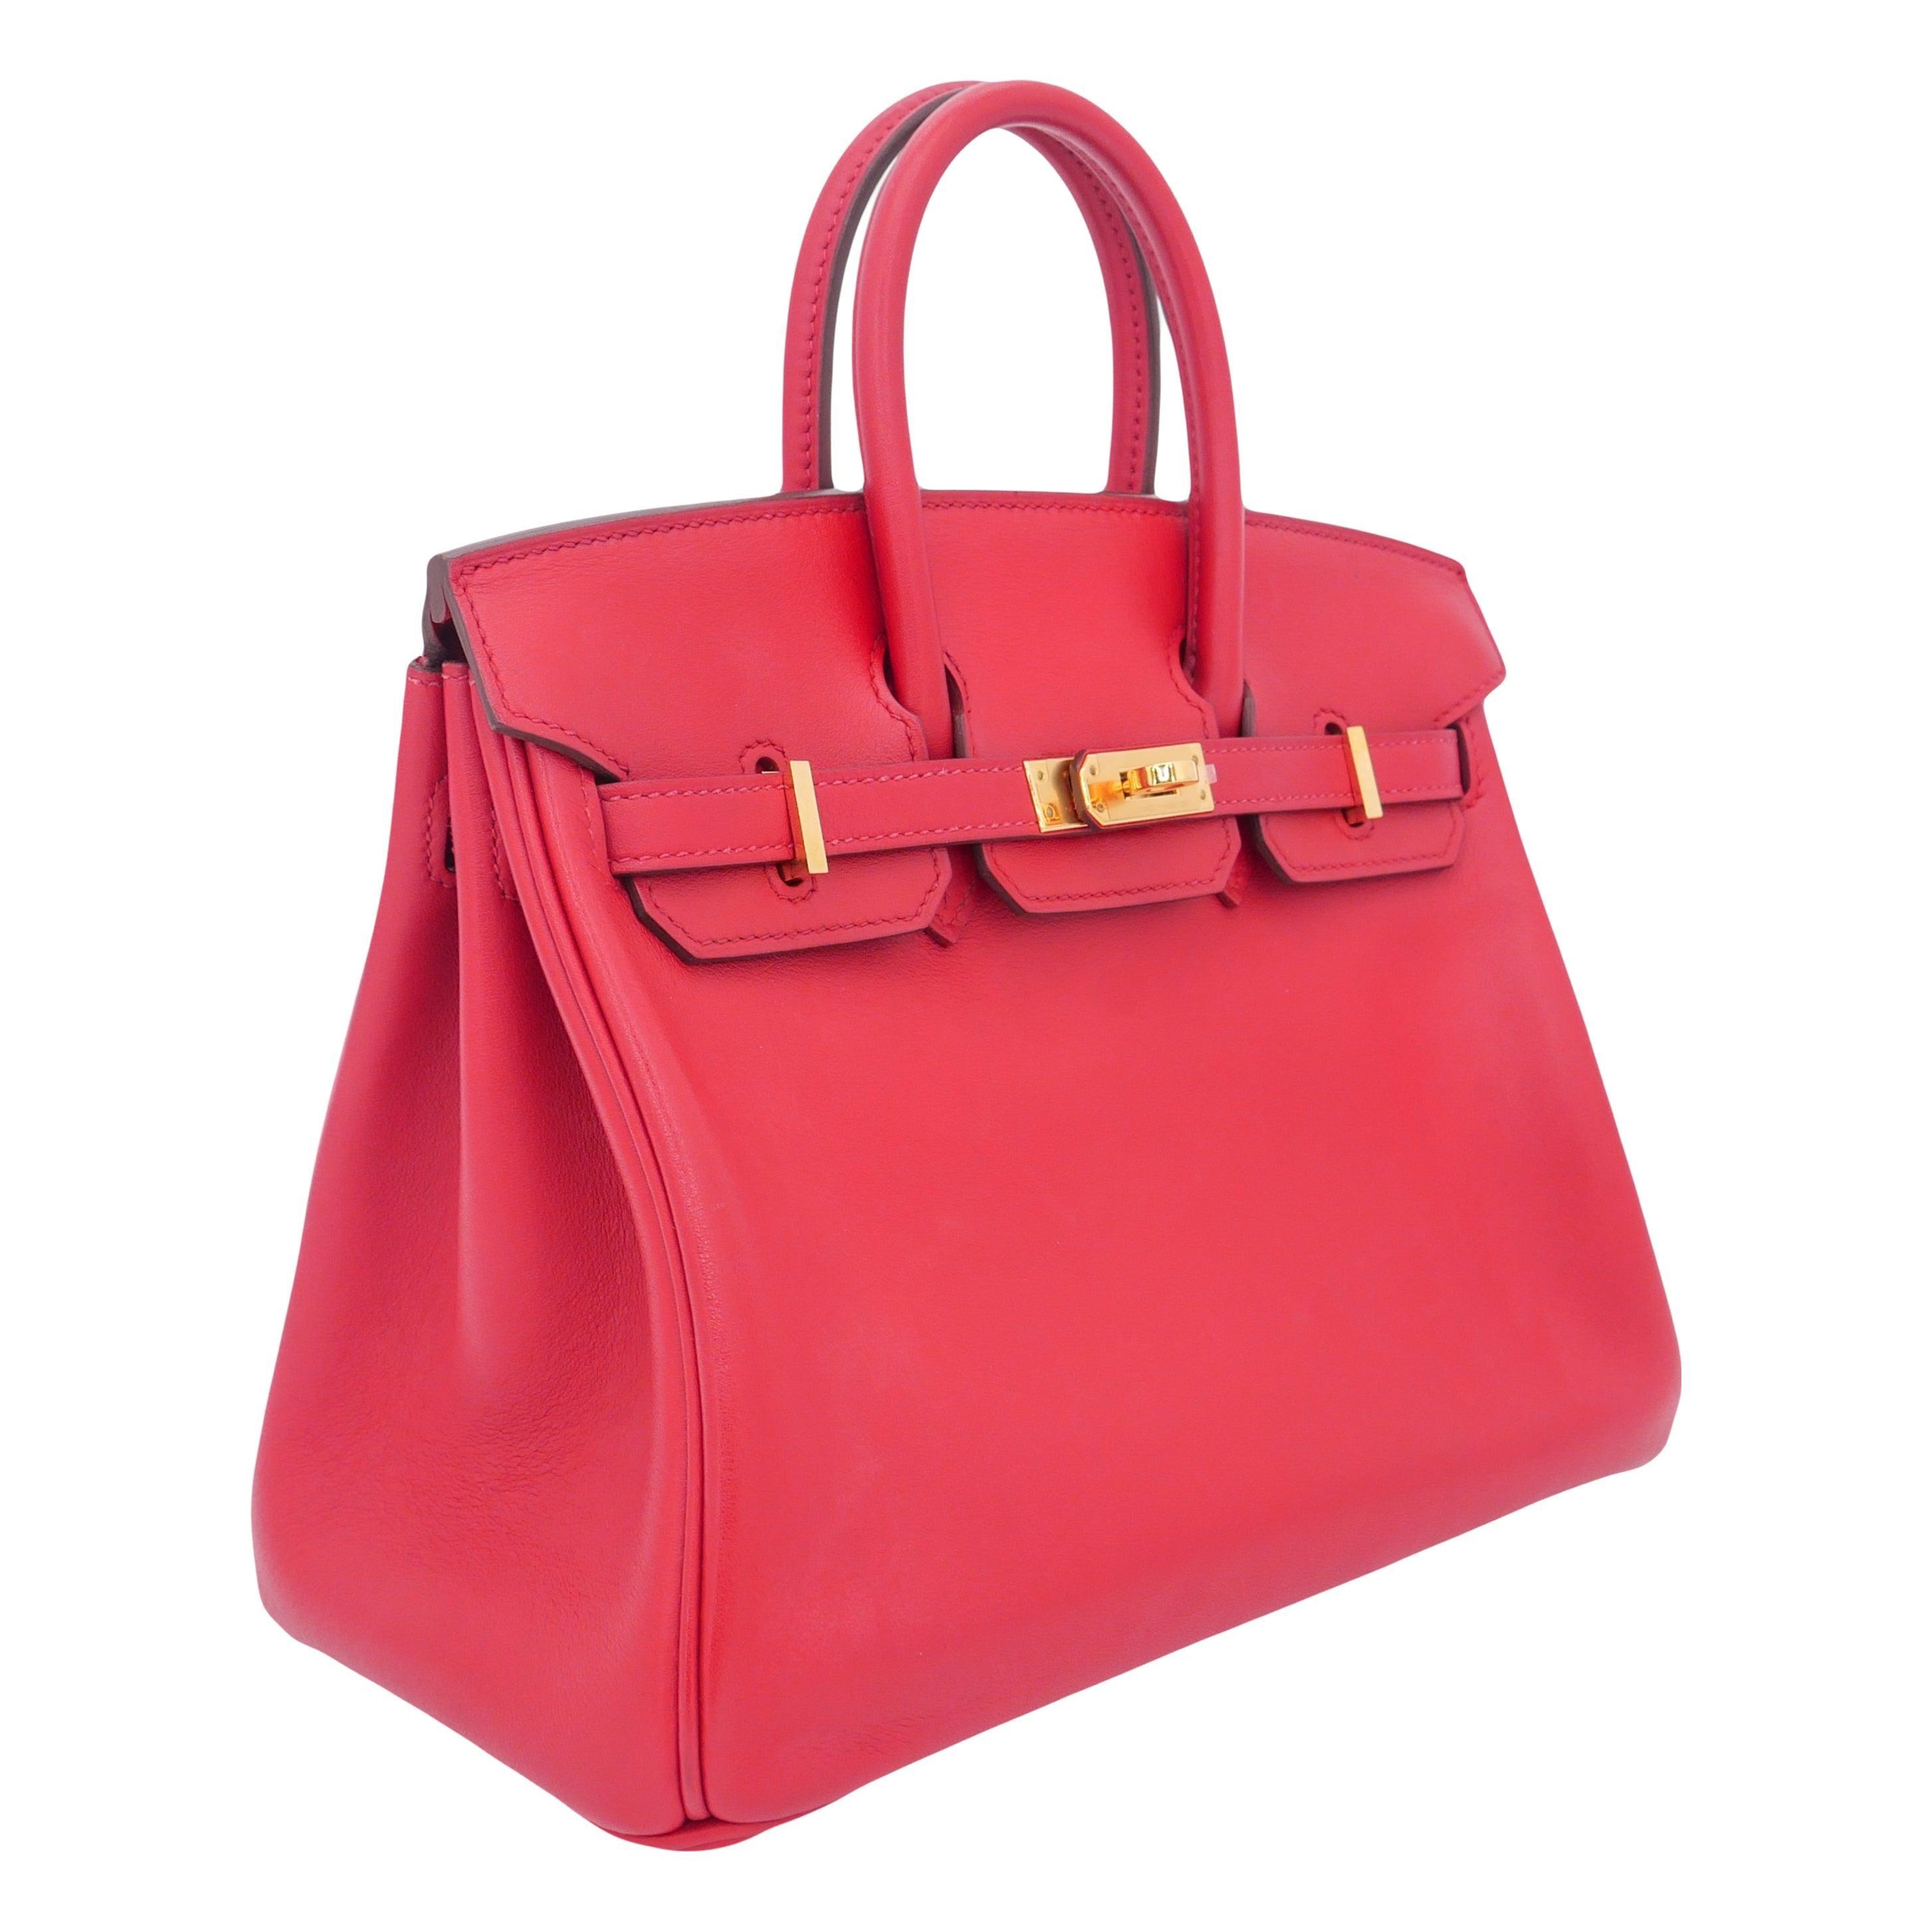 Brand: Hermès
Style: Birkin
Size: 25cm
Color: Rouge Pimet
Material: Swift Leather
Hardware: Gold Hardware (GHW)
Dimensions: 10